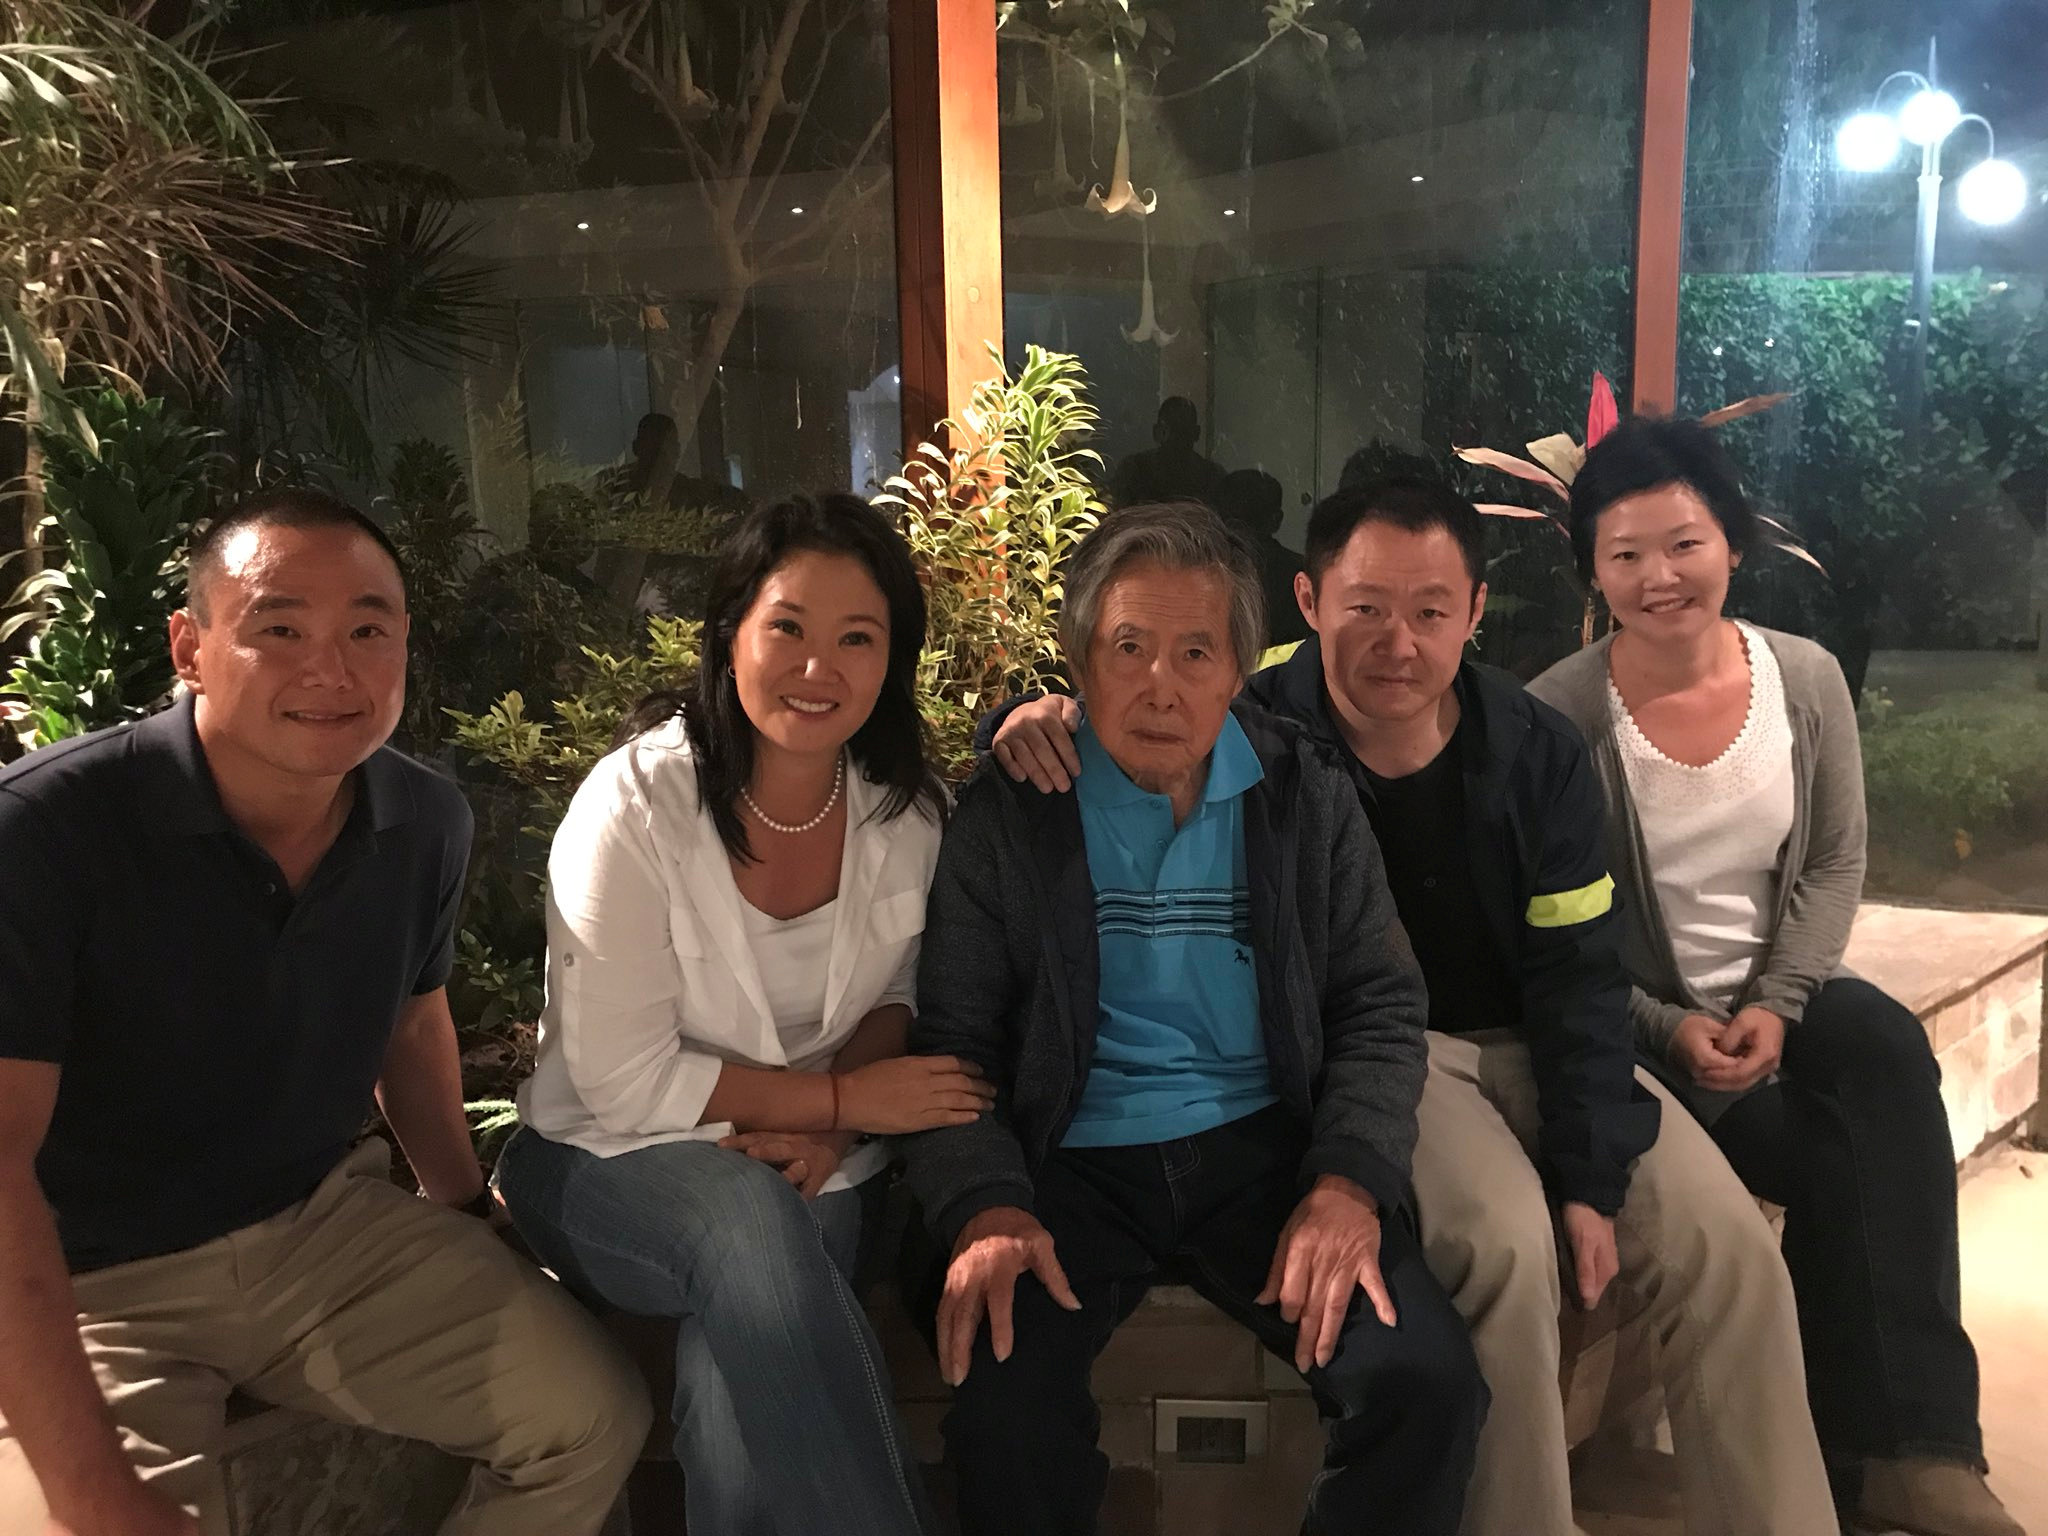 Former Peruvian President Alberto Fujimori poses for a photo with daughter Keiko and son Kenji and two unidentified family members in Lima, Peru, in this photo obtained from social media, January 4, 2018. Keiko Fujimori/via REUTERS THIS IMAGE HAS BEEN SUPPLIED BY A THIRD PARTY. MANDATORY CREDIT. NO RESALES. NO ARCHIVES